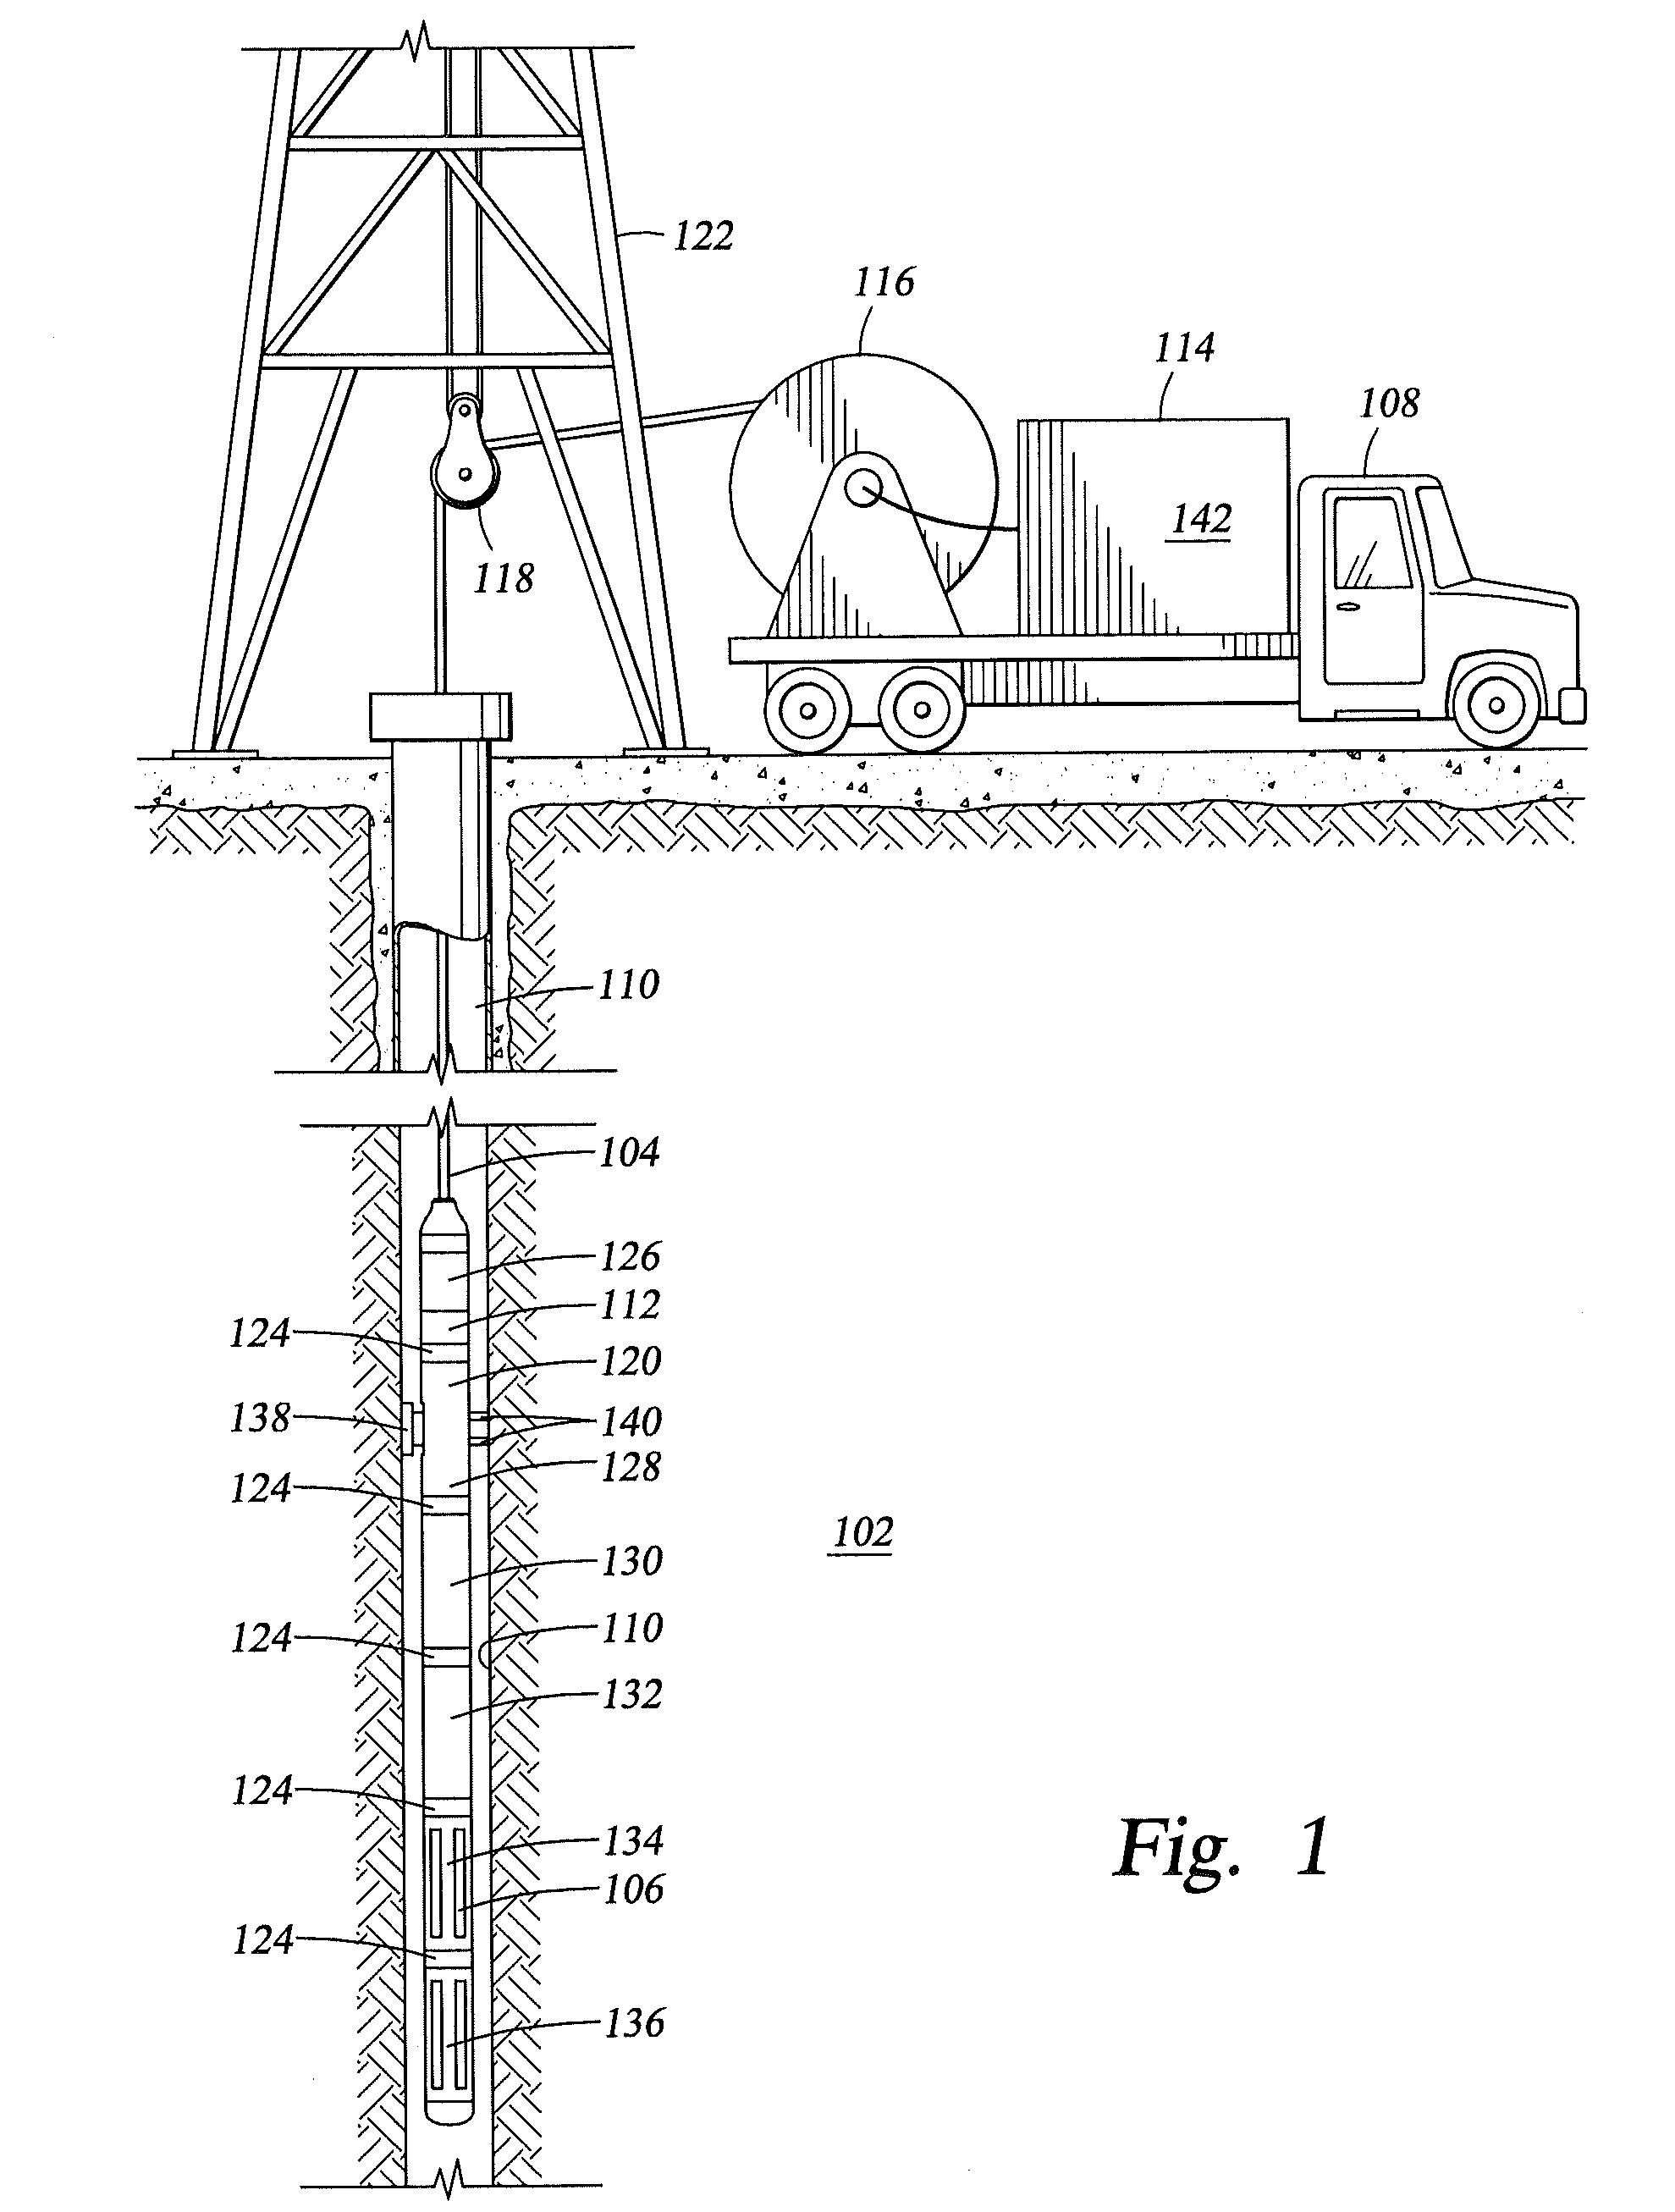 Apparatus and method for evaluating downhole fluids